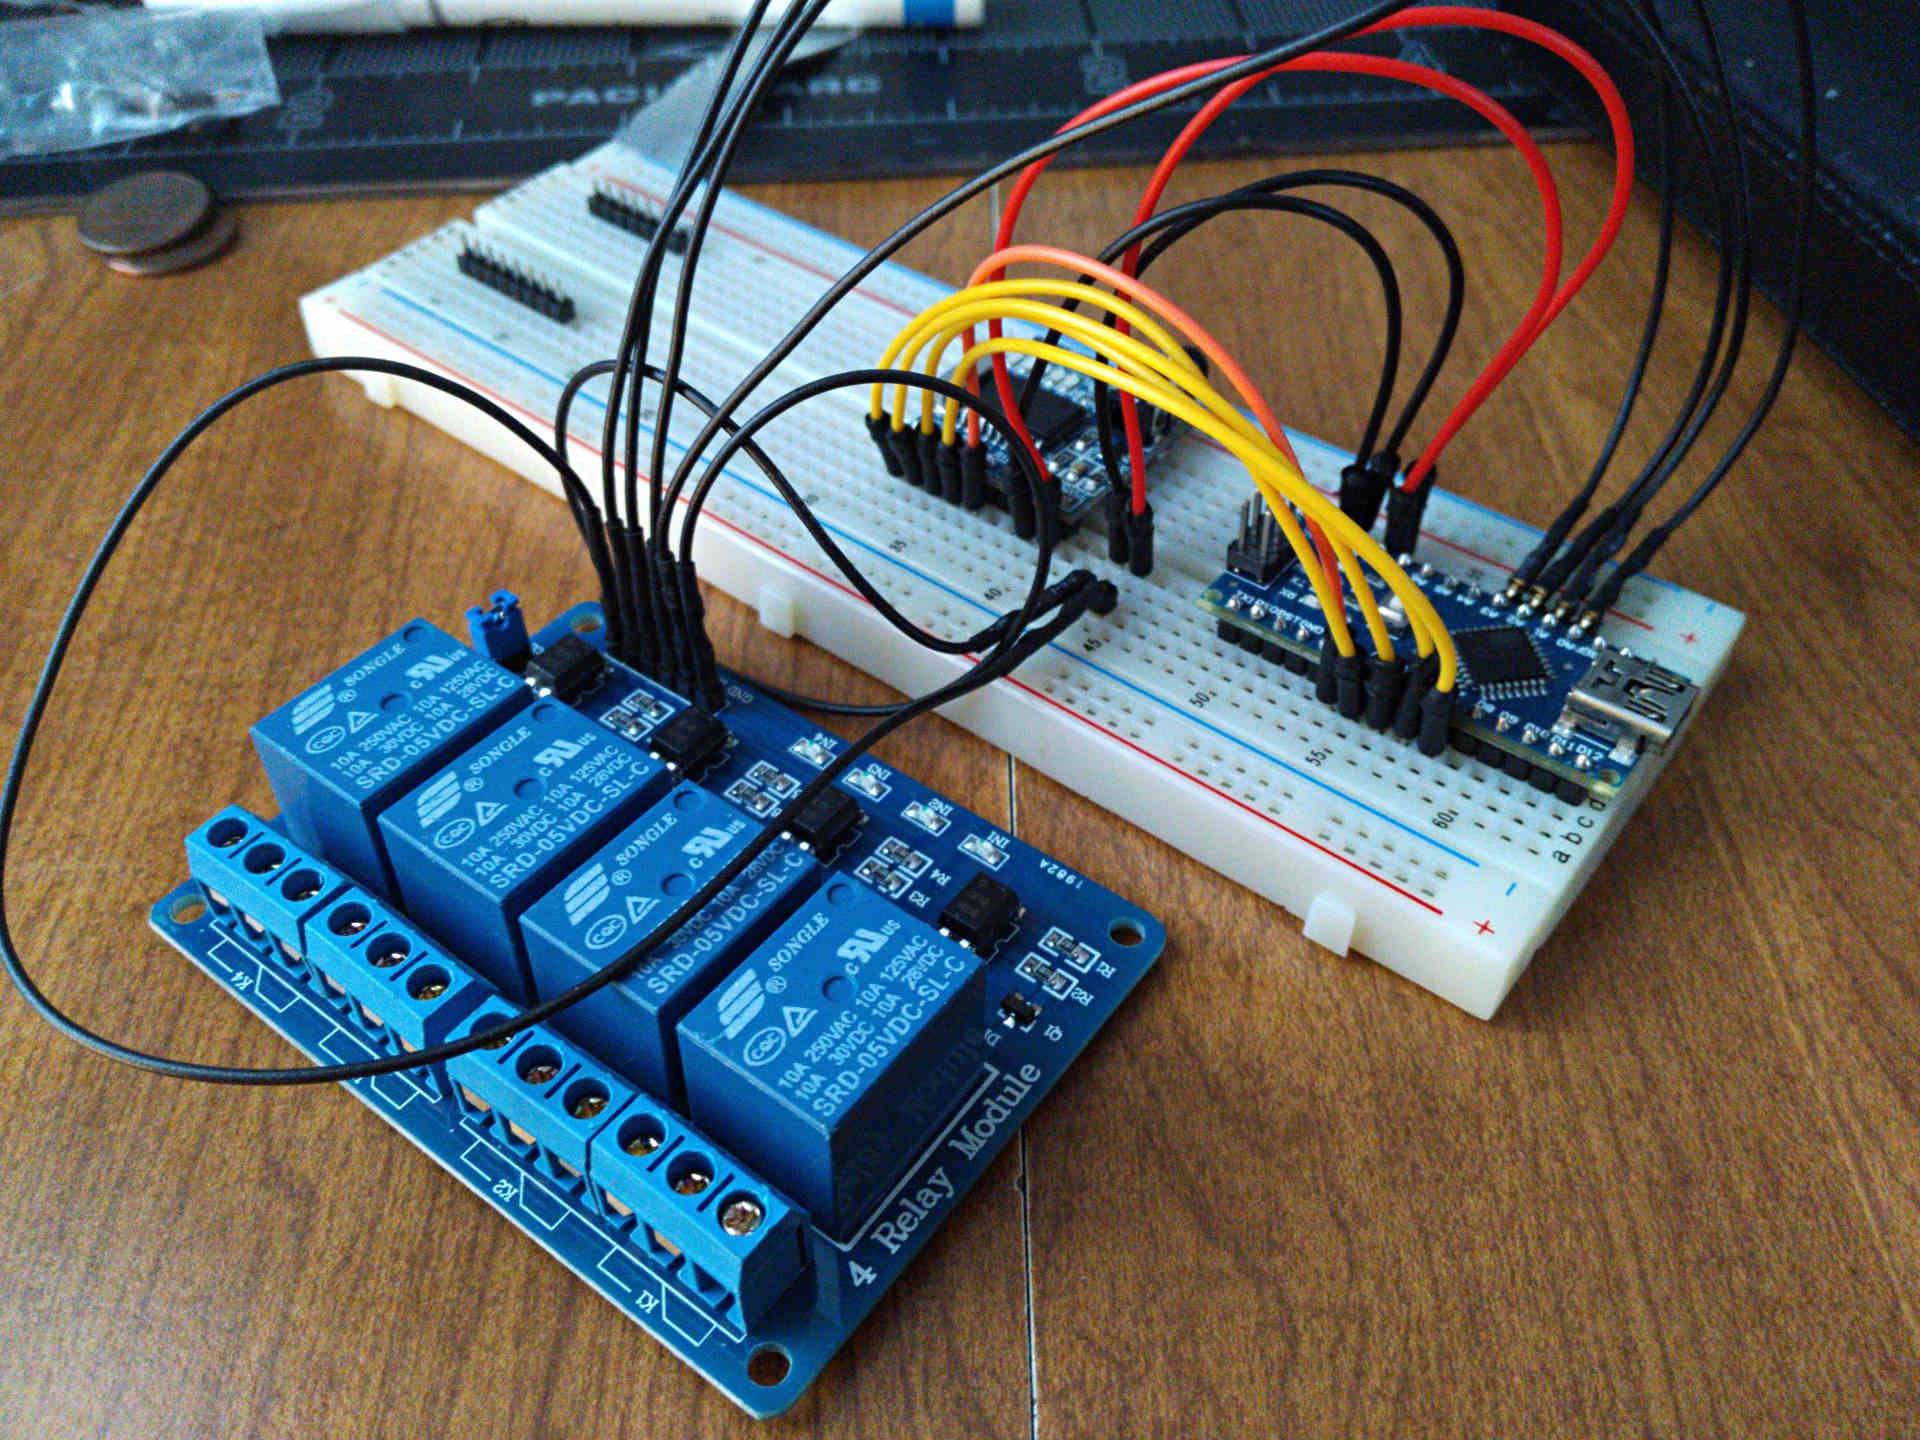 Relays connected to breadboard circuit